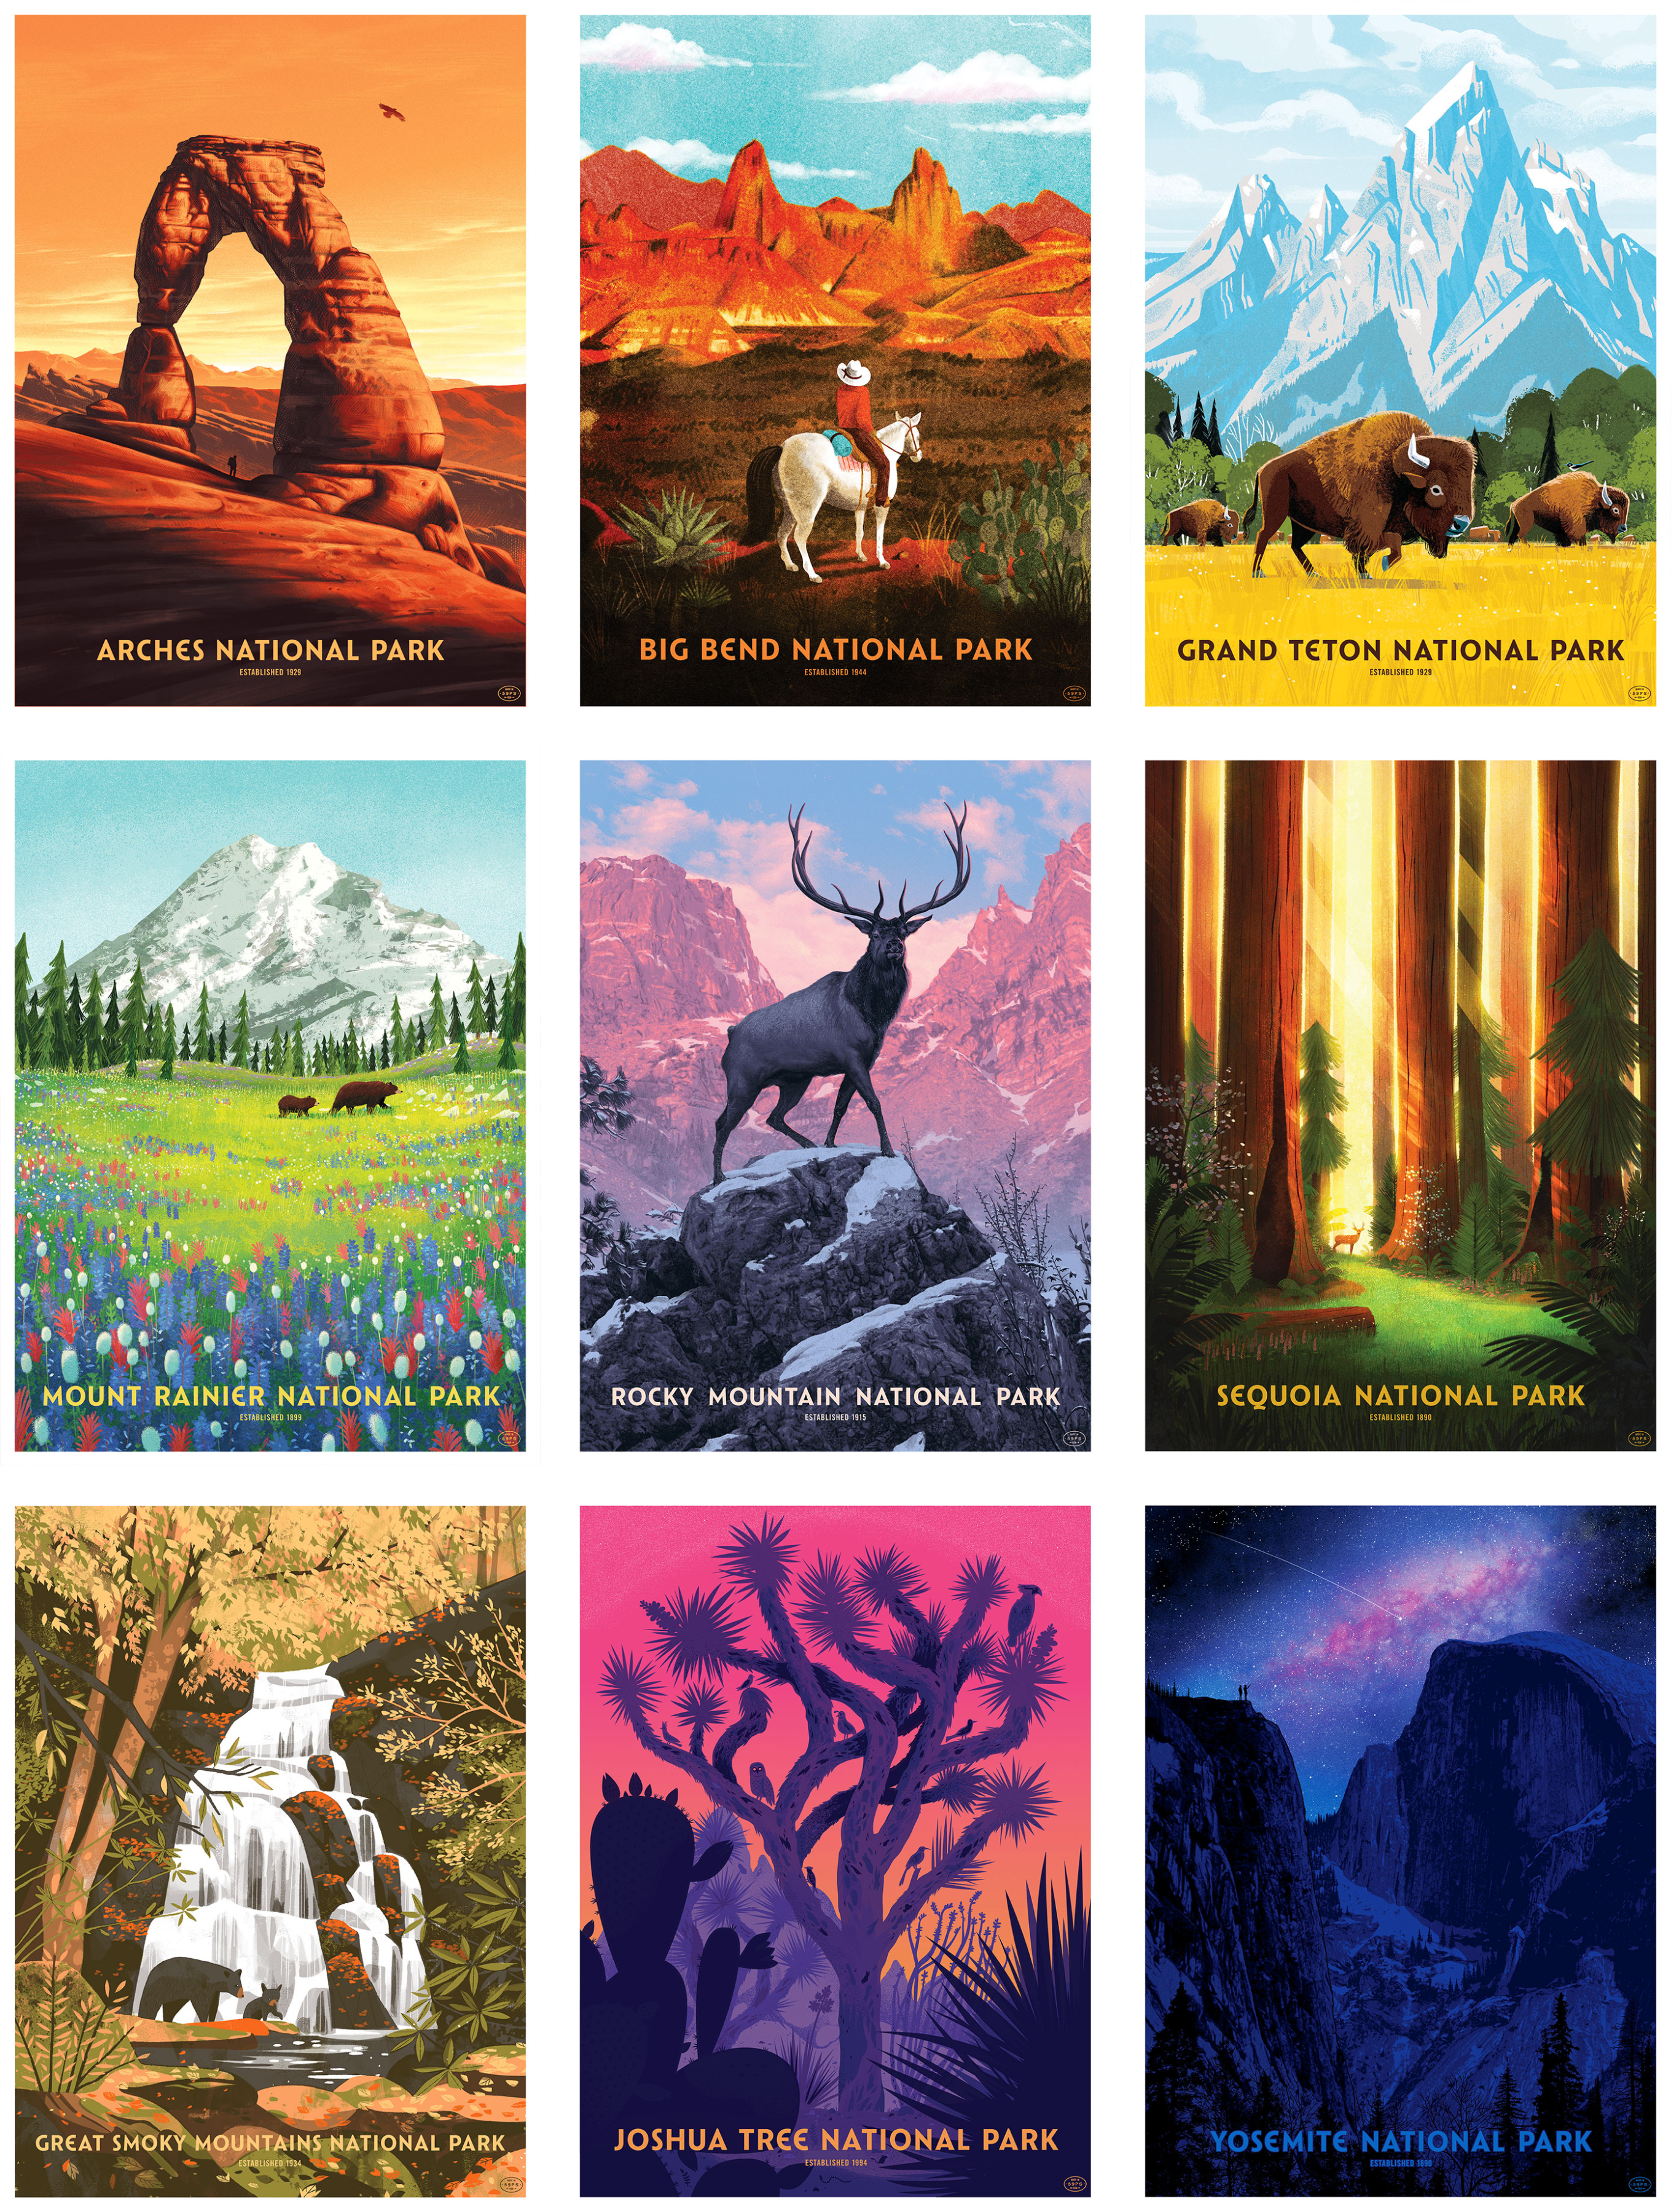 <b class="accent">FIG. 8 — </b> Arches National Park by Nicolas Delort, Big Bend National Park by Brave the Woods, Grand Teton National Park by Kim Smith, Mount Rainier National Park by Glenn Thomas, Rocky Mountain National Park by Rory Kurtz, Sequoia National Park by Glenn Thomas, Great Smoky Mountains National Park by Chris Turnham, Joshua Tree National Park by Little Friends of Printmaking, and Yosemite National Park by Dan McCarthy.